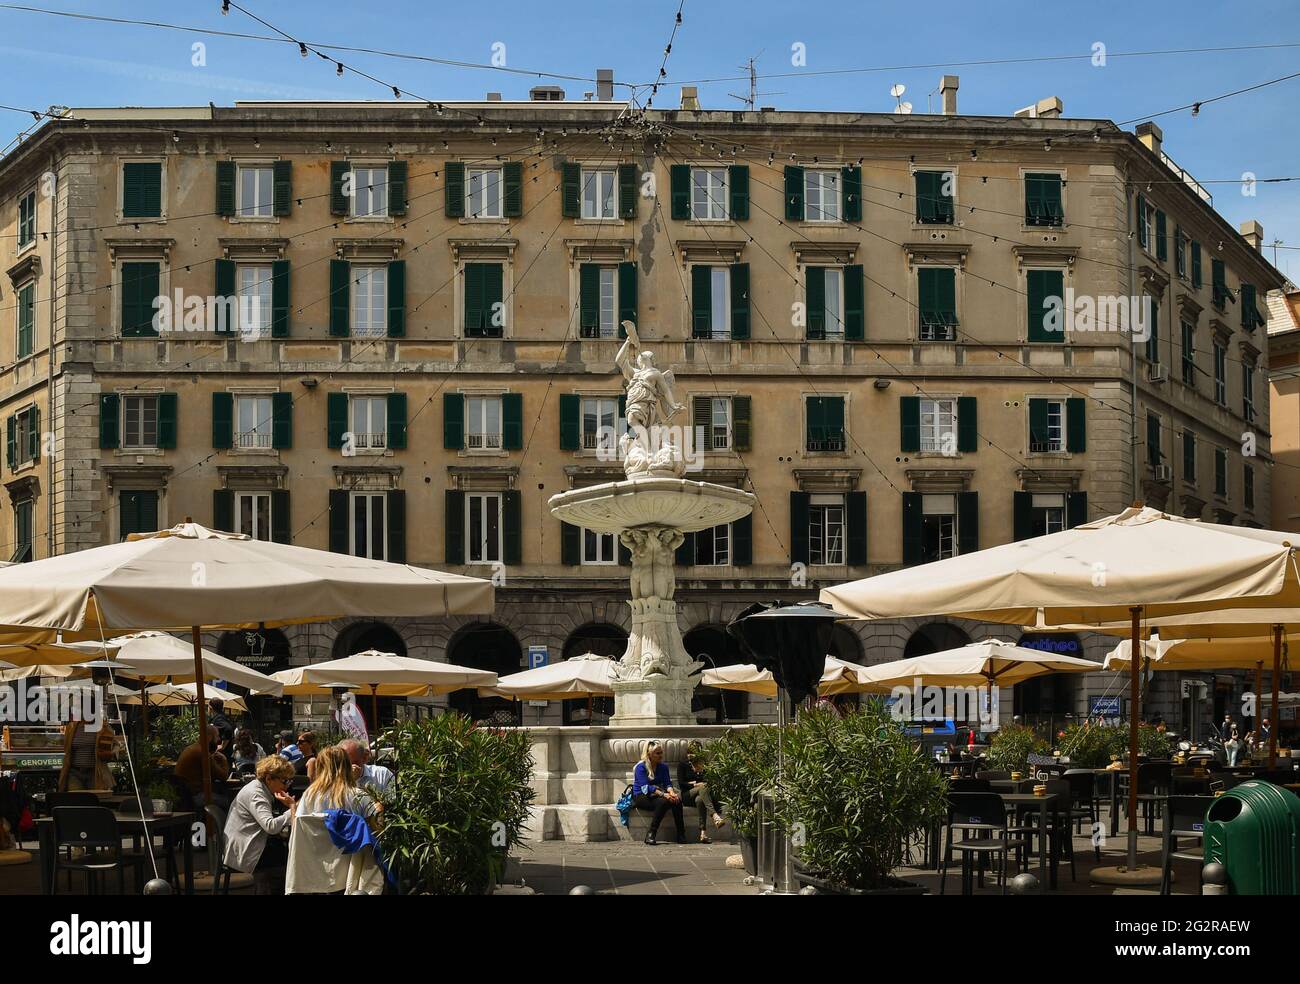 Piazza Colombo with the ancient fountain (1646) in its centre and outdoor cafes under sunshades, Genoa, Liguria, Italy Stock Photo